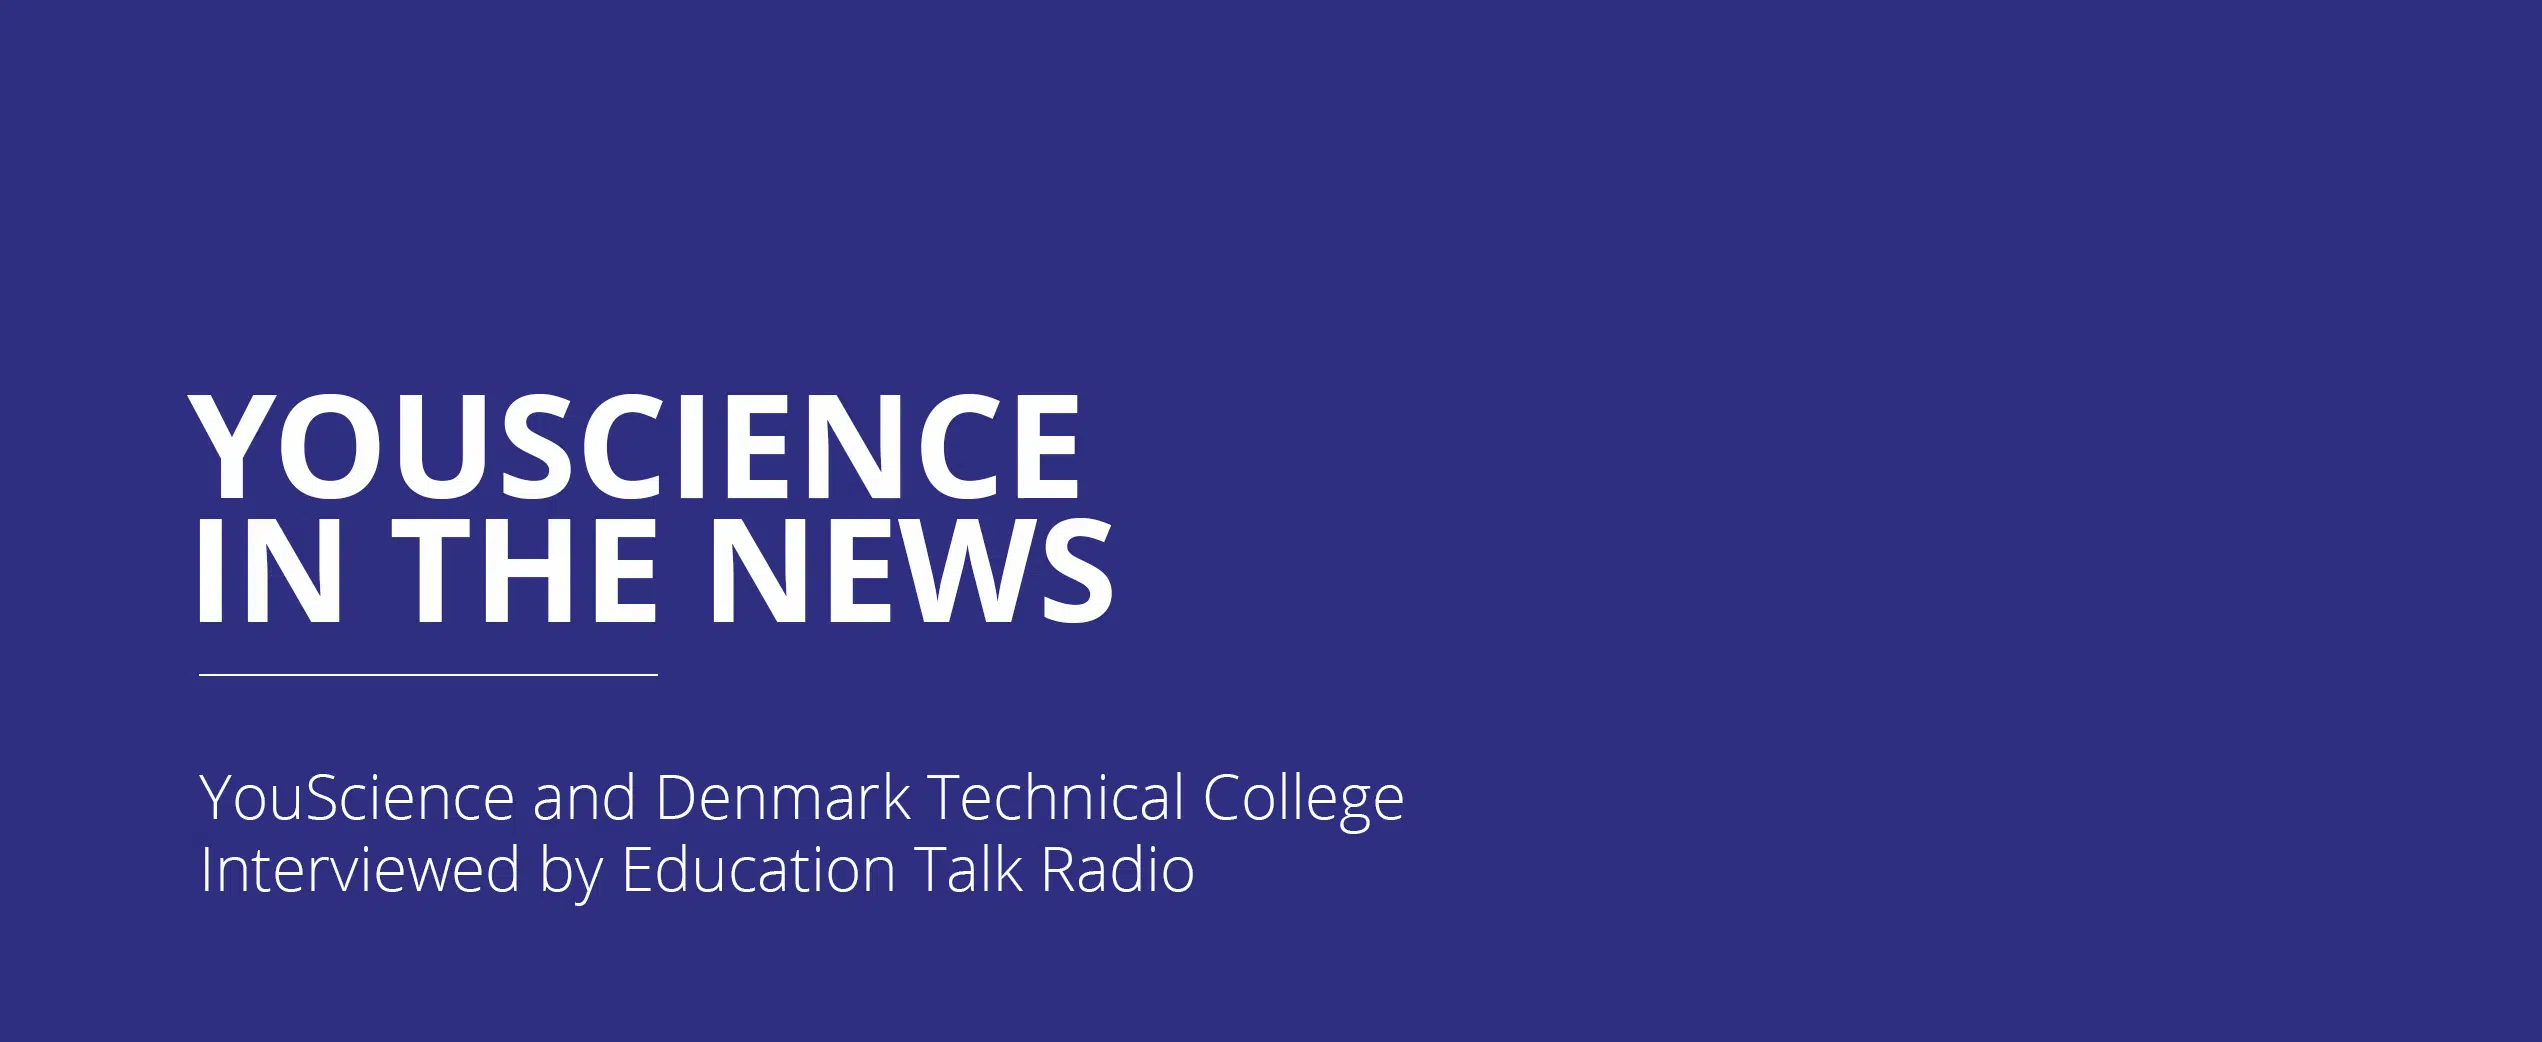 YouScience and Denmark Technical College Interviewed by Education Talk Radio